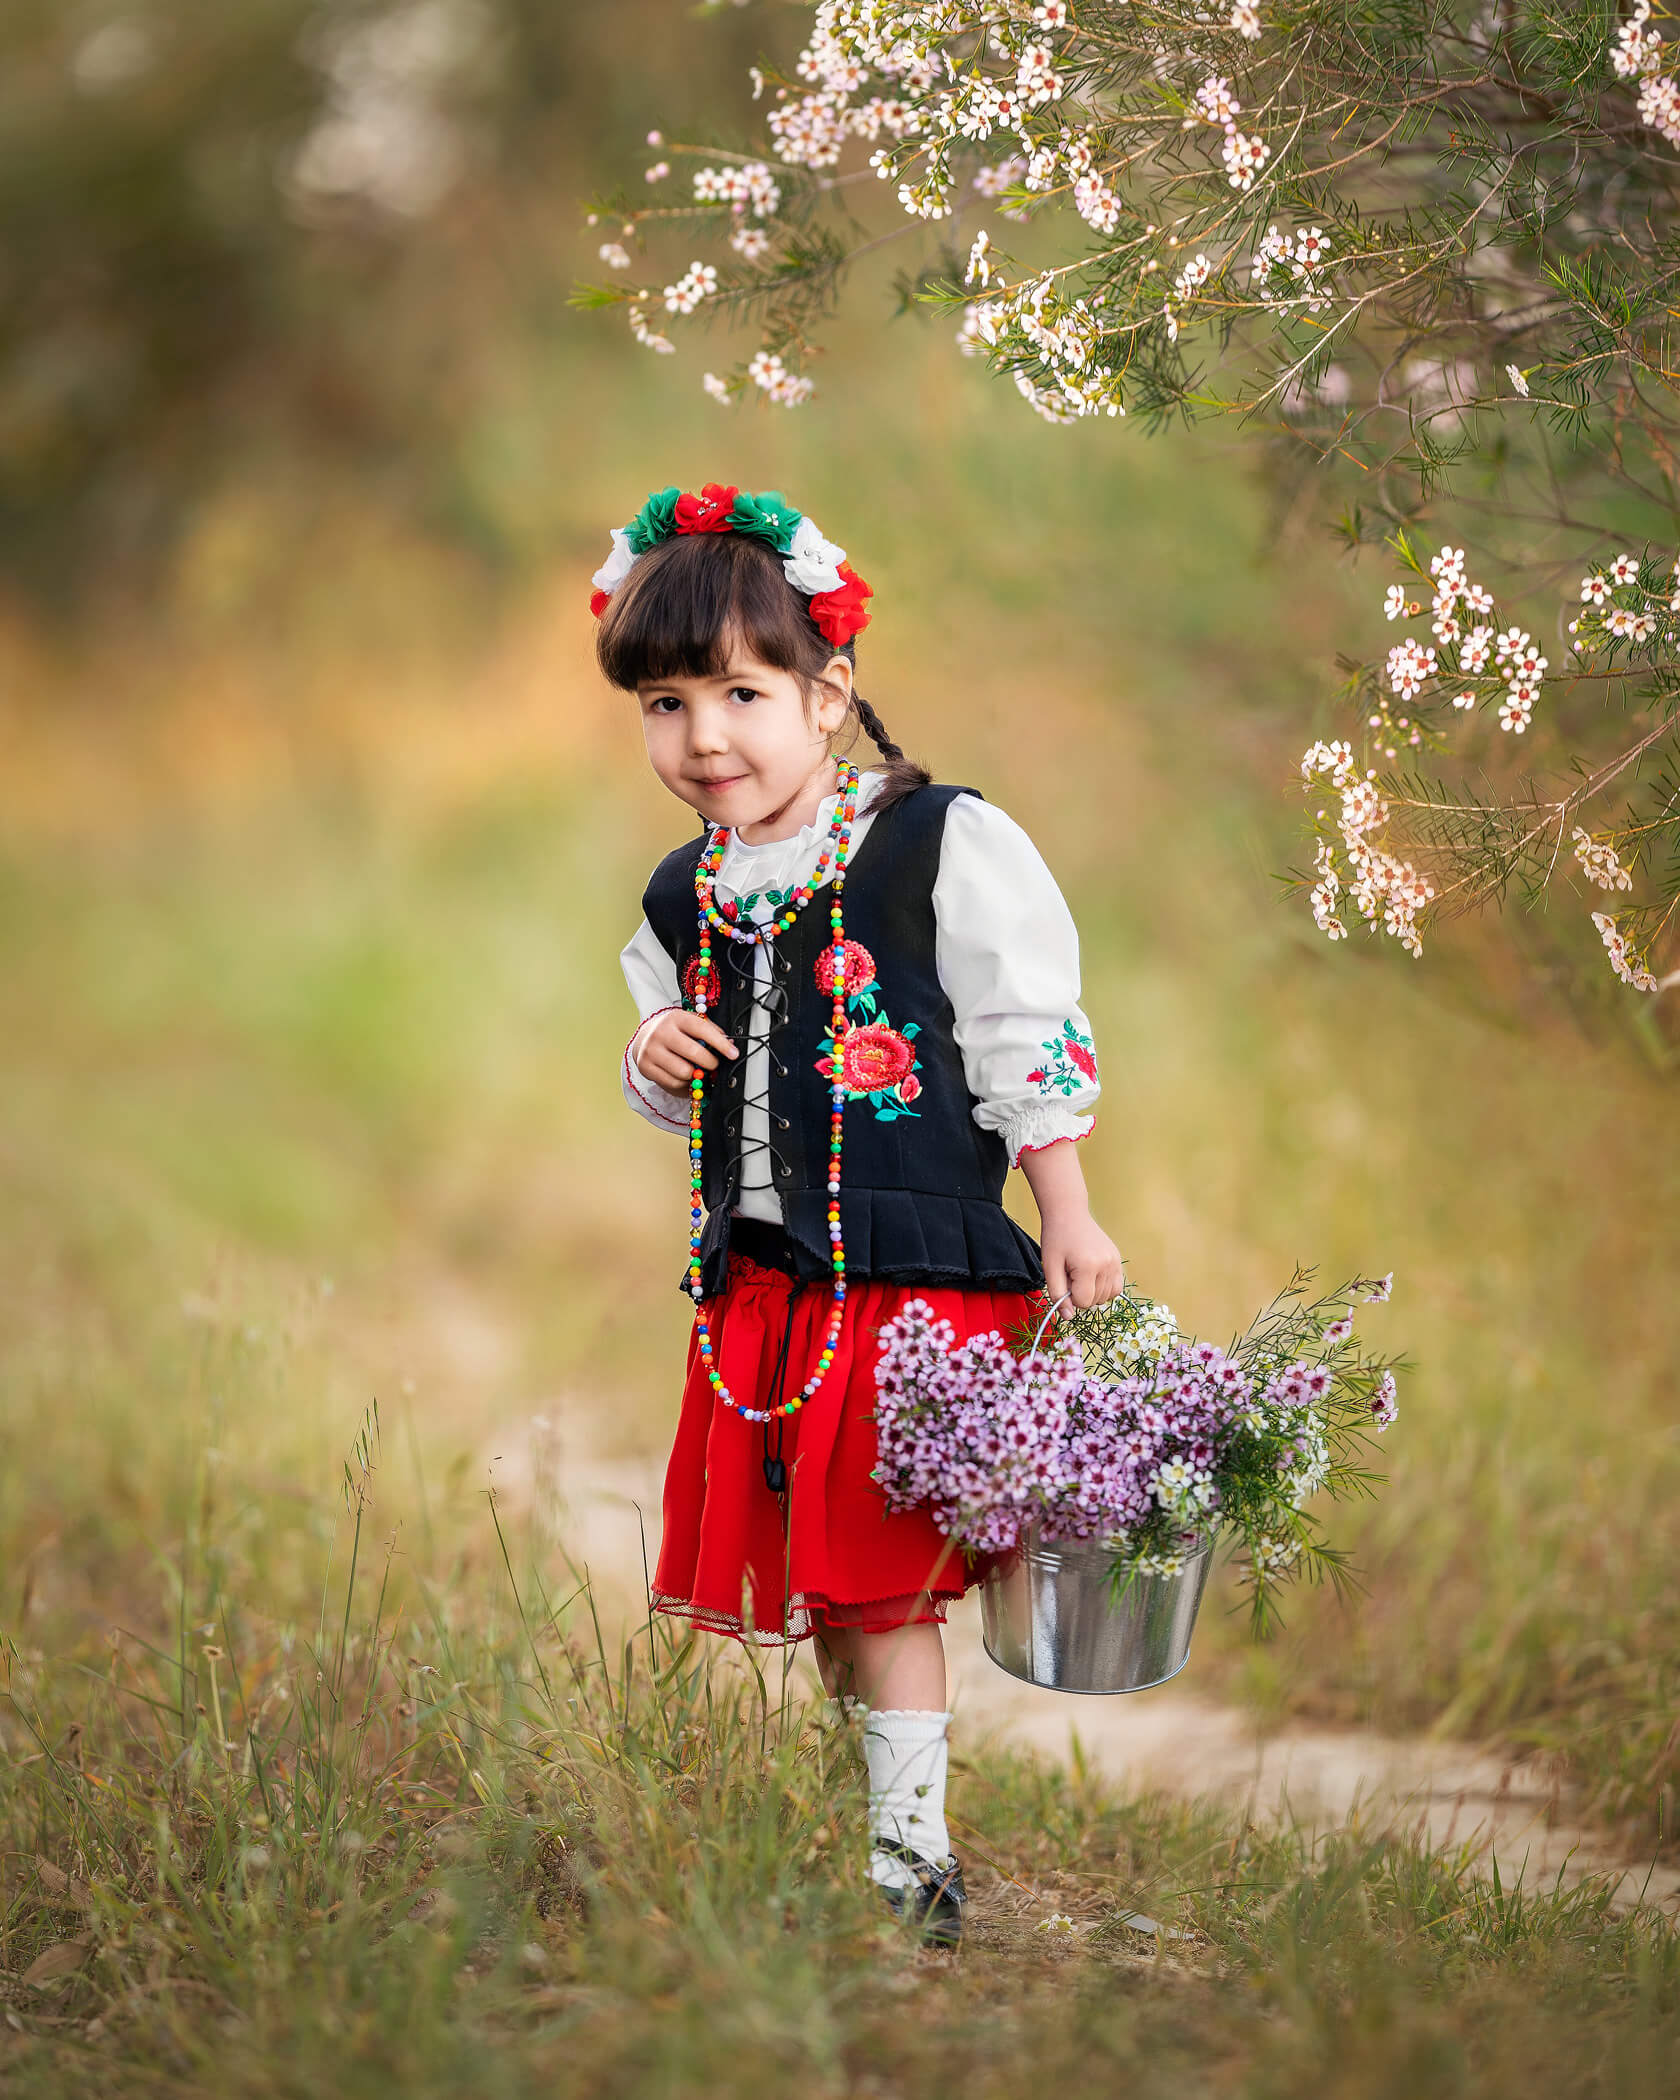 Perth child photo shoot in traditional polish outfit